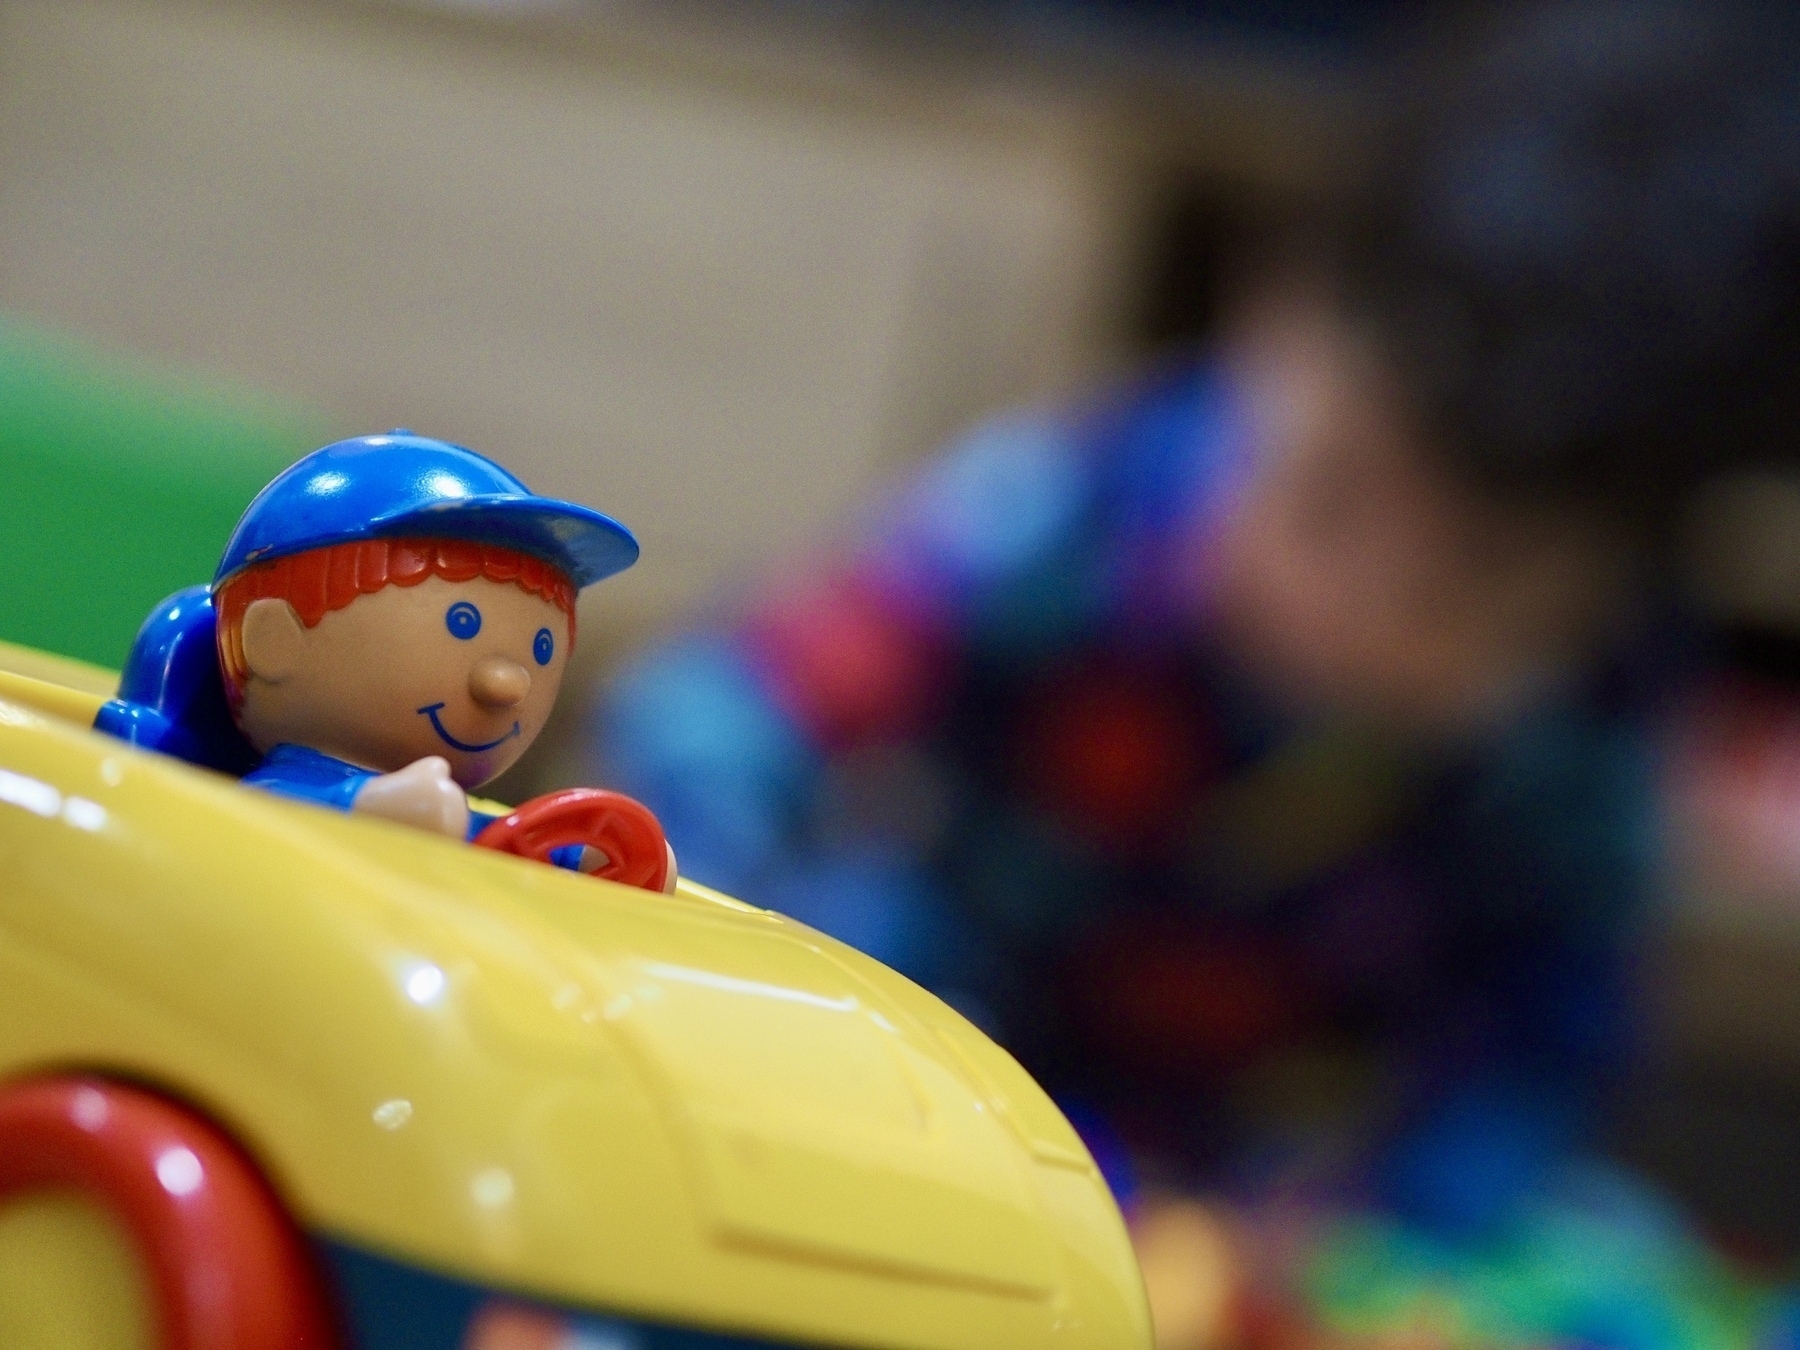 A close-up of a plastic figurine in a toy car with a blurred toddler in the background